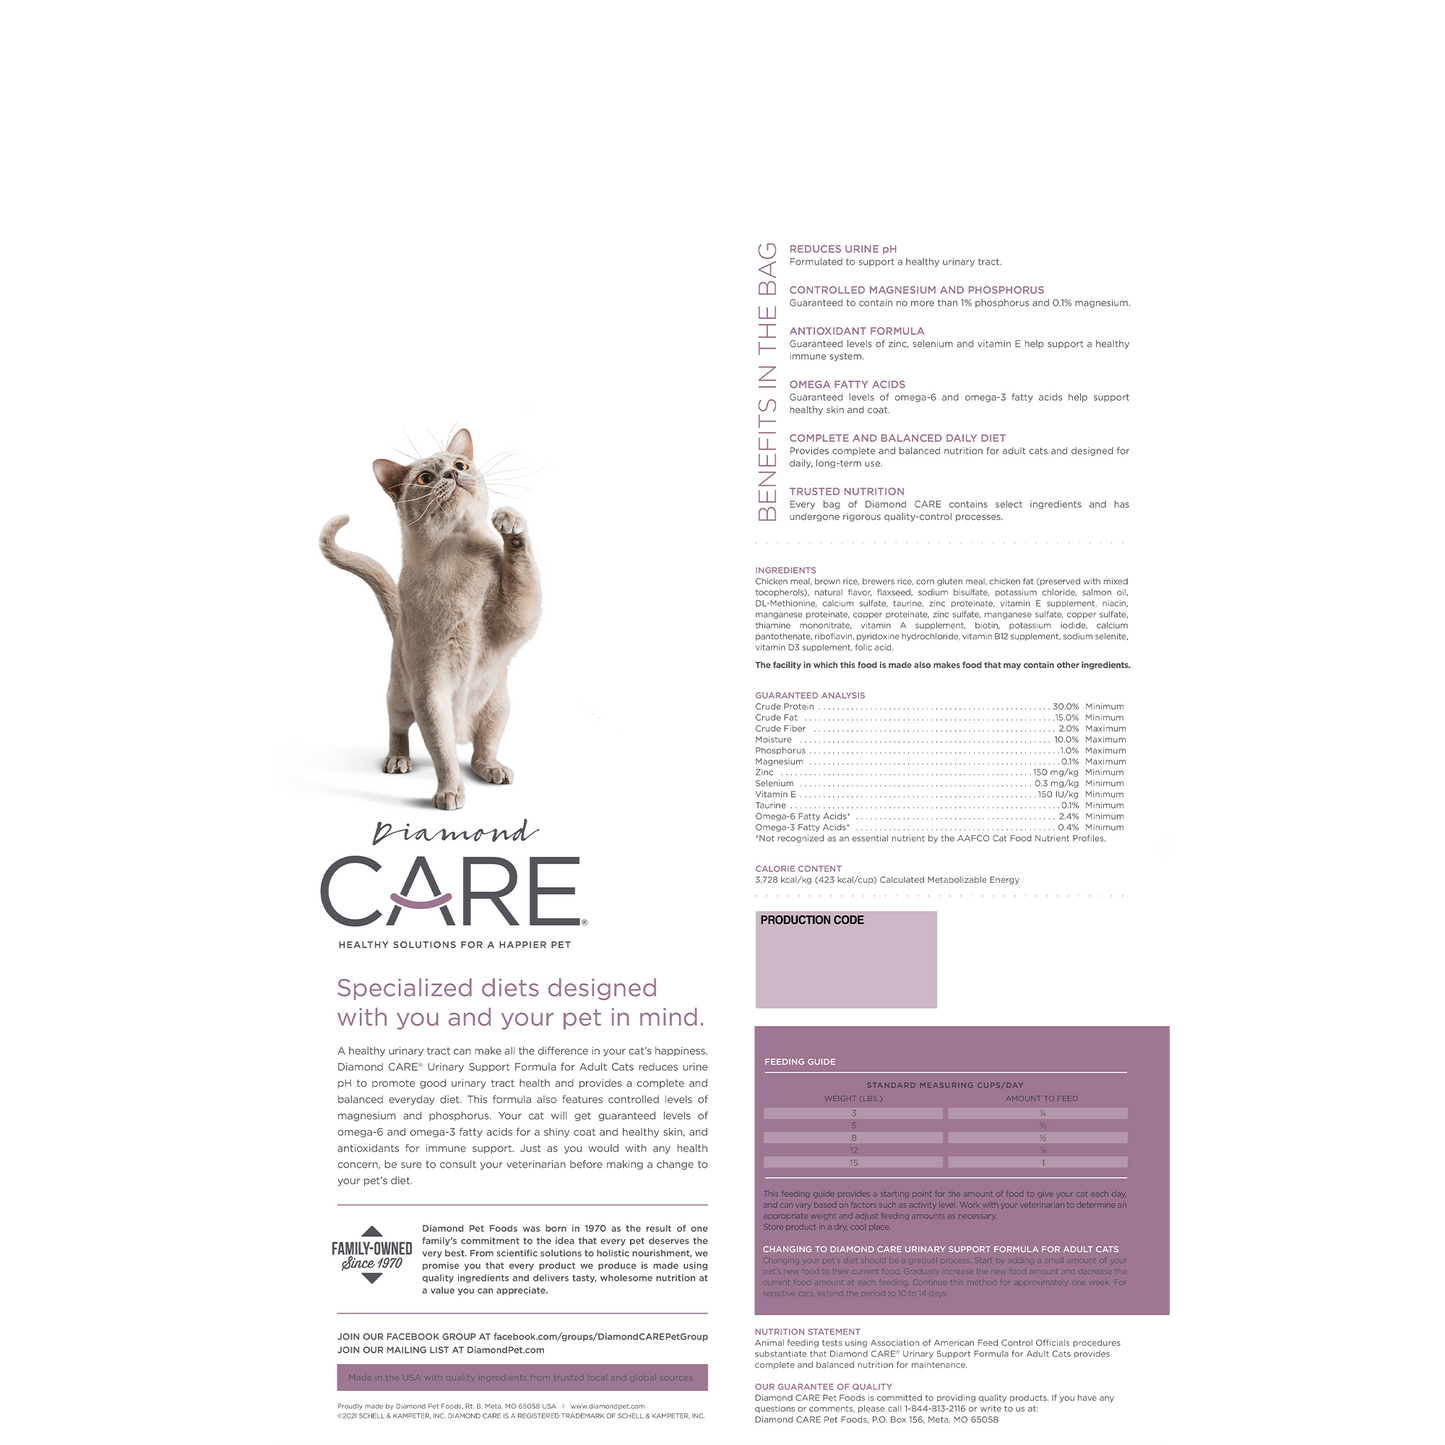 DIAMOND CARE URINARY SUPPORT FORMULA FOR ADULT CATS